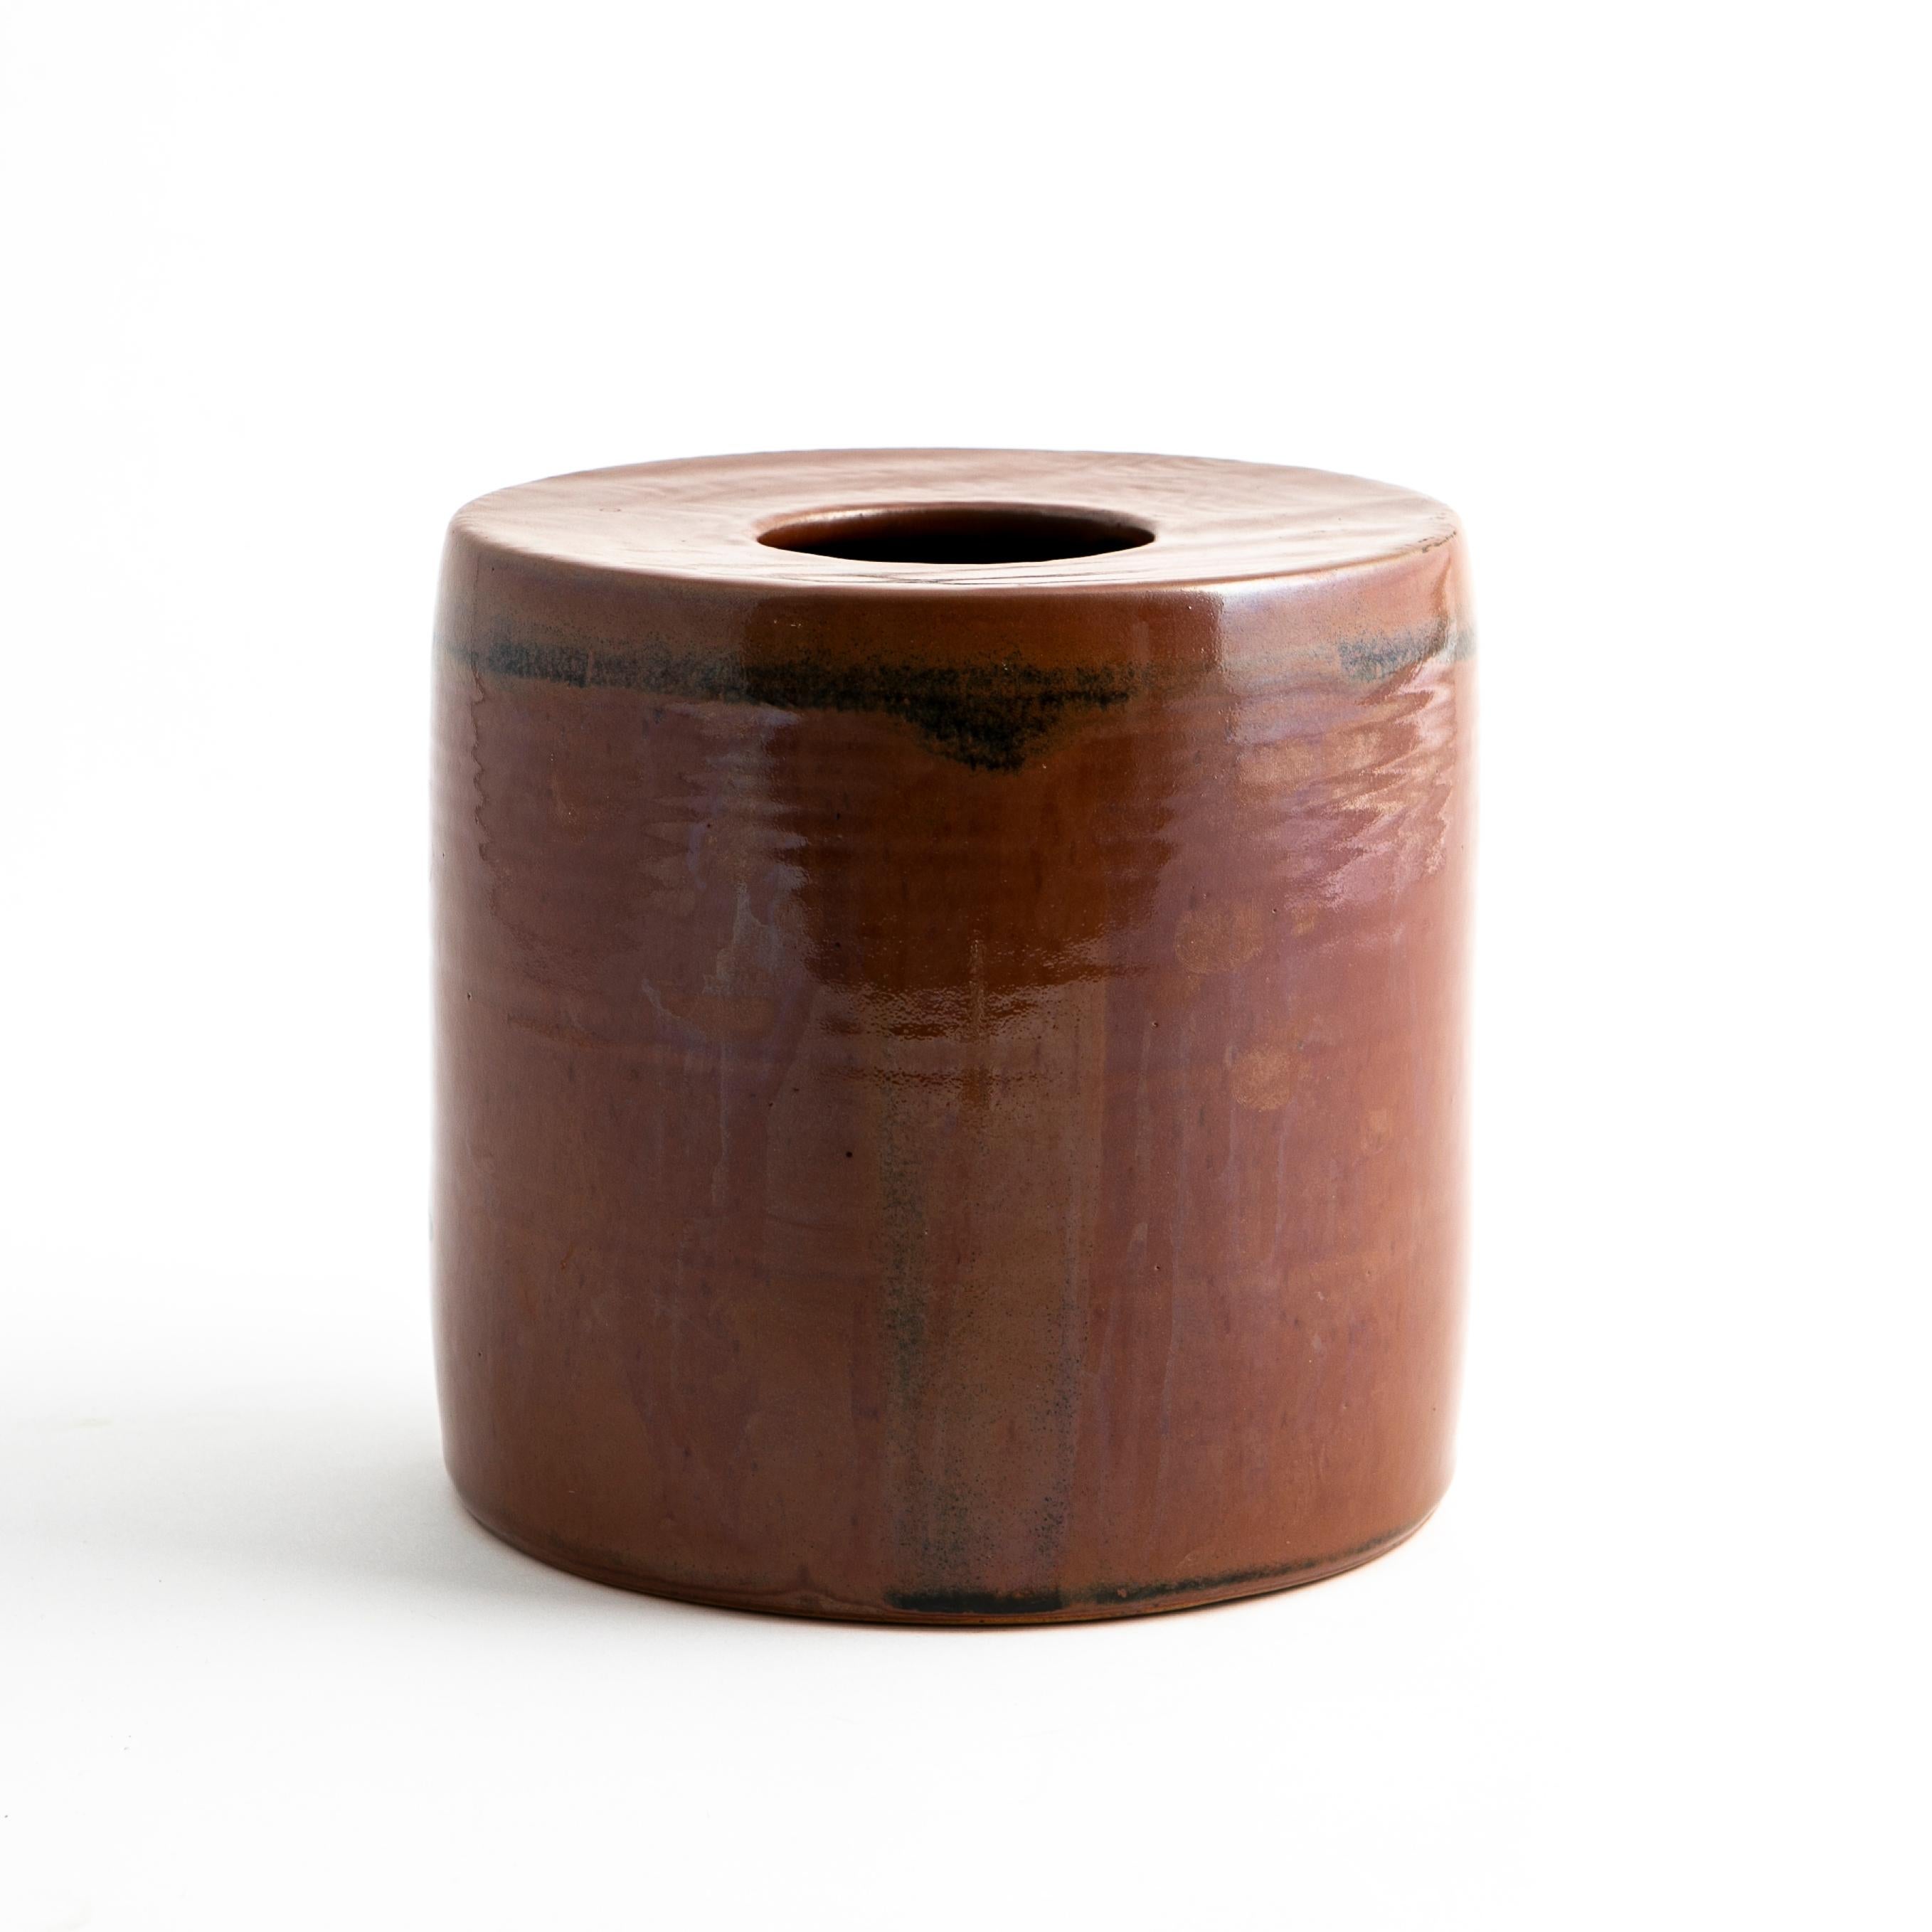 Jacob Bang, Danish 1932-2011
Vintage midcentury Scandinavian vase by Jacob Bang.
Cylinder form in maroon glazed stoneware with strokes in a darker glaze.
Designed by Jacob Bang in his own workshop, Denmark 1960s. Marked on base.


Jacob Bang